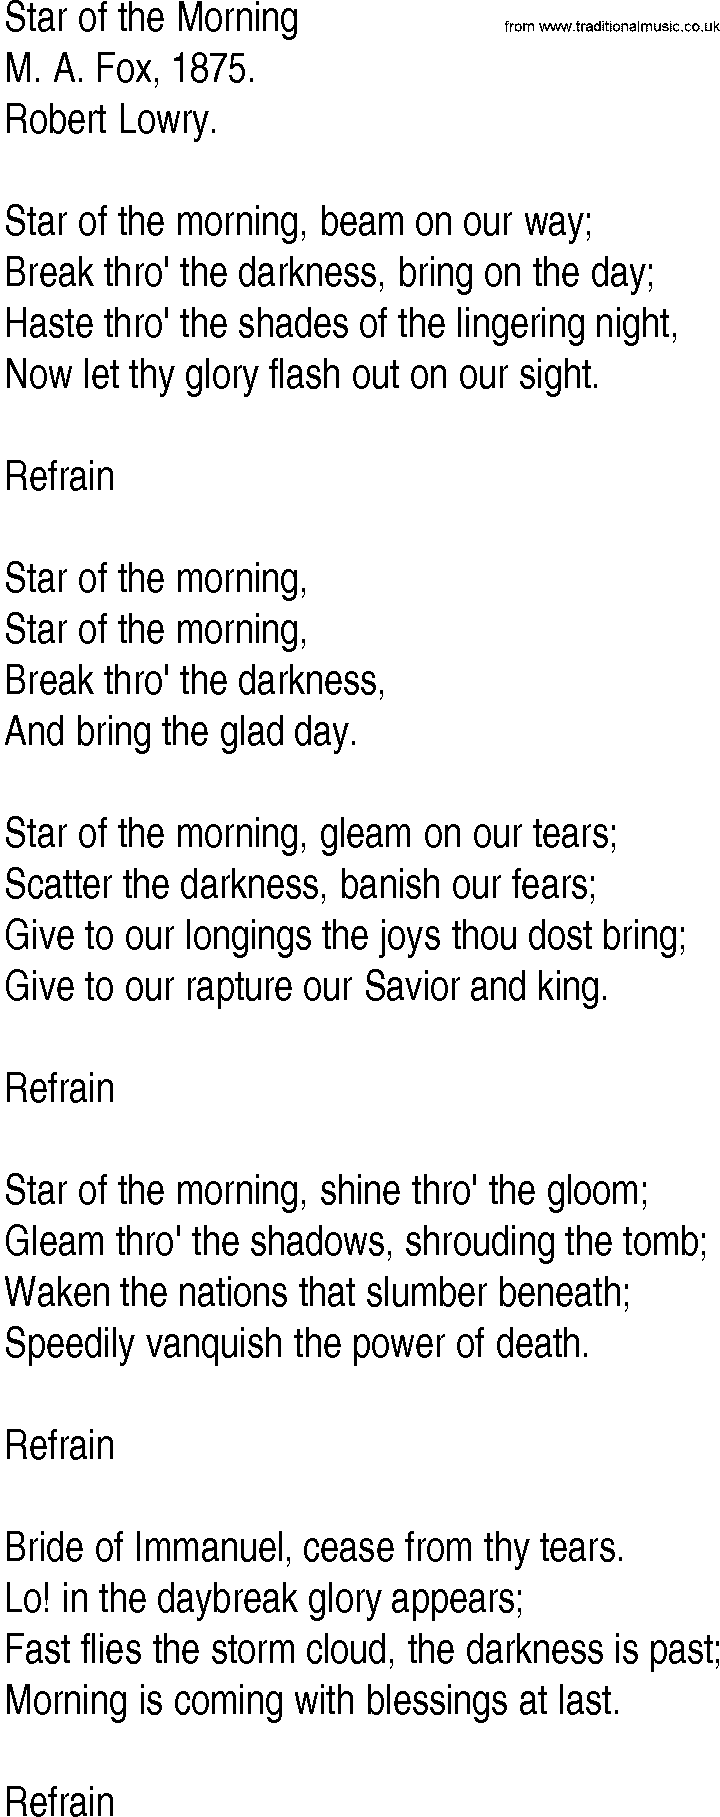 Hymn and Gospel Song: Star of the Morning by M A Fox lyrics